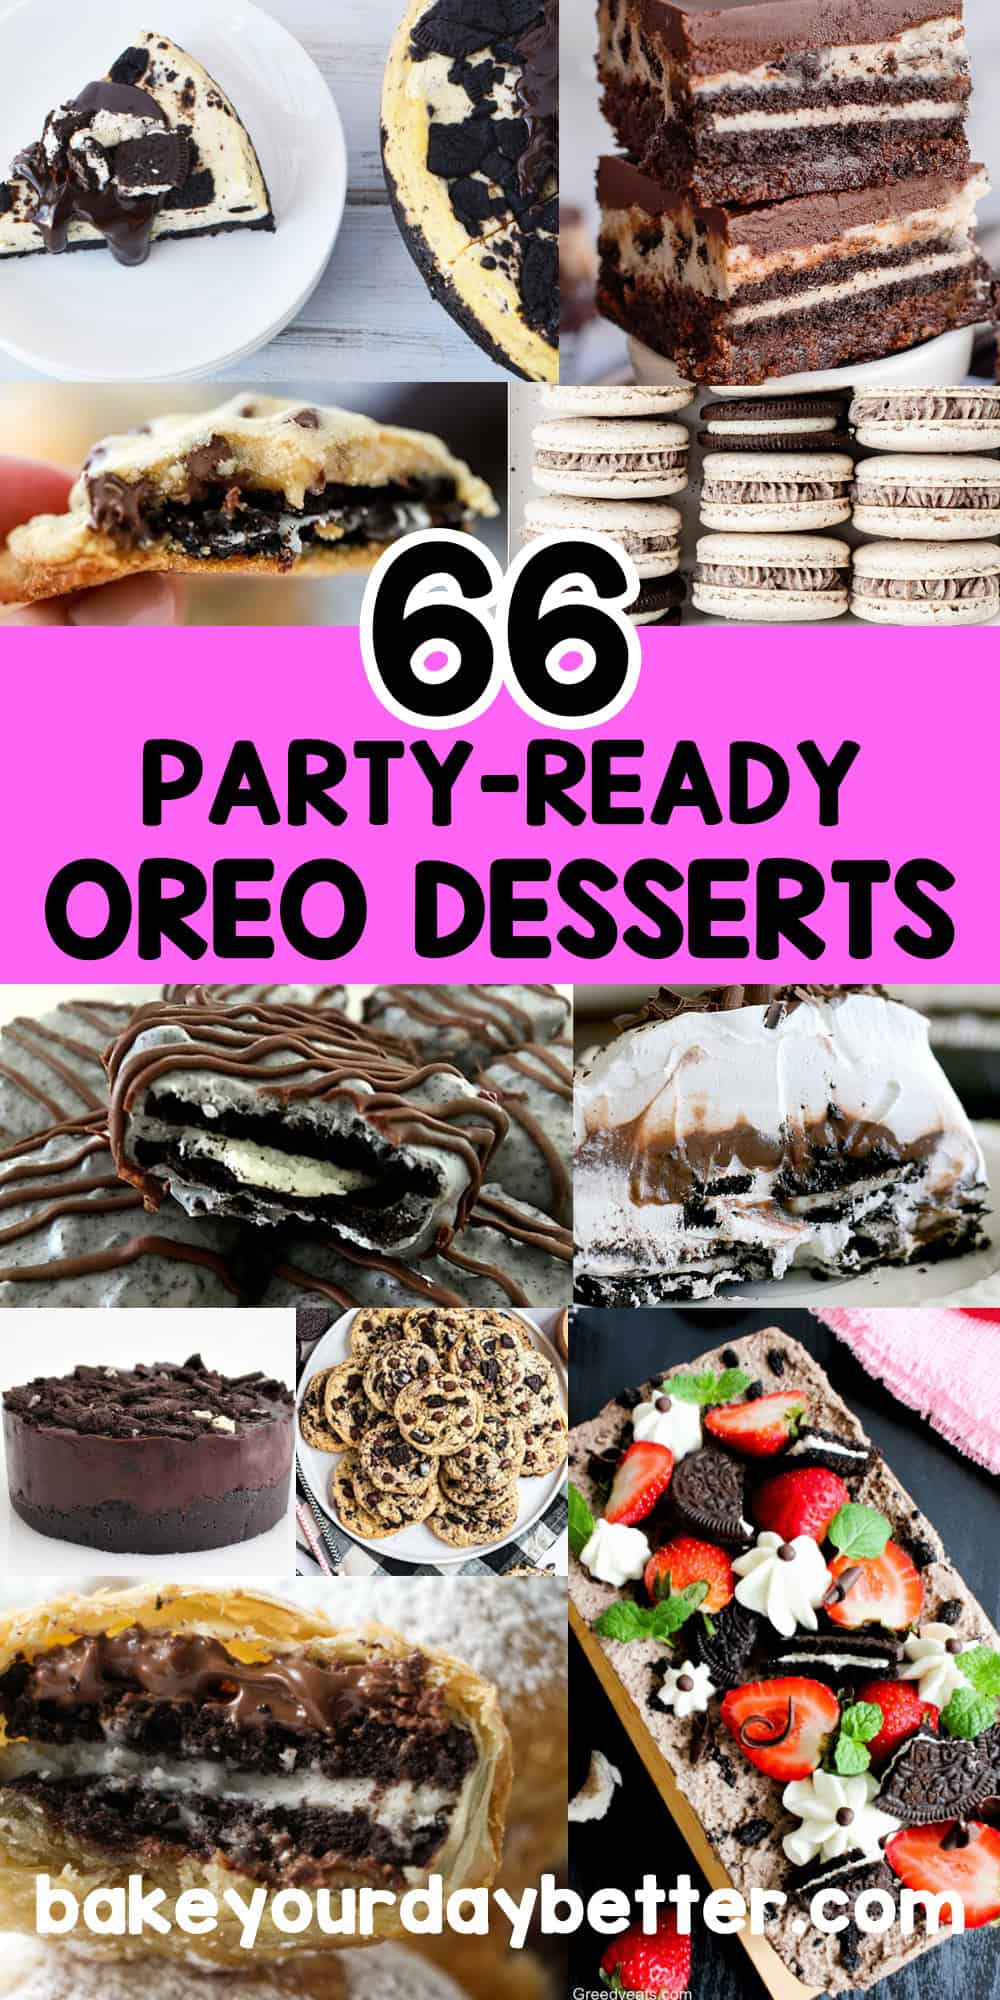 pictures of oreo desserts with text overlay that says: 66 party ready oreo desserts